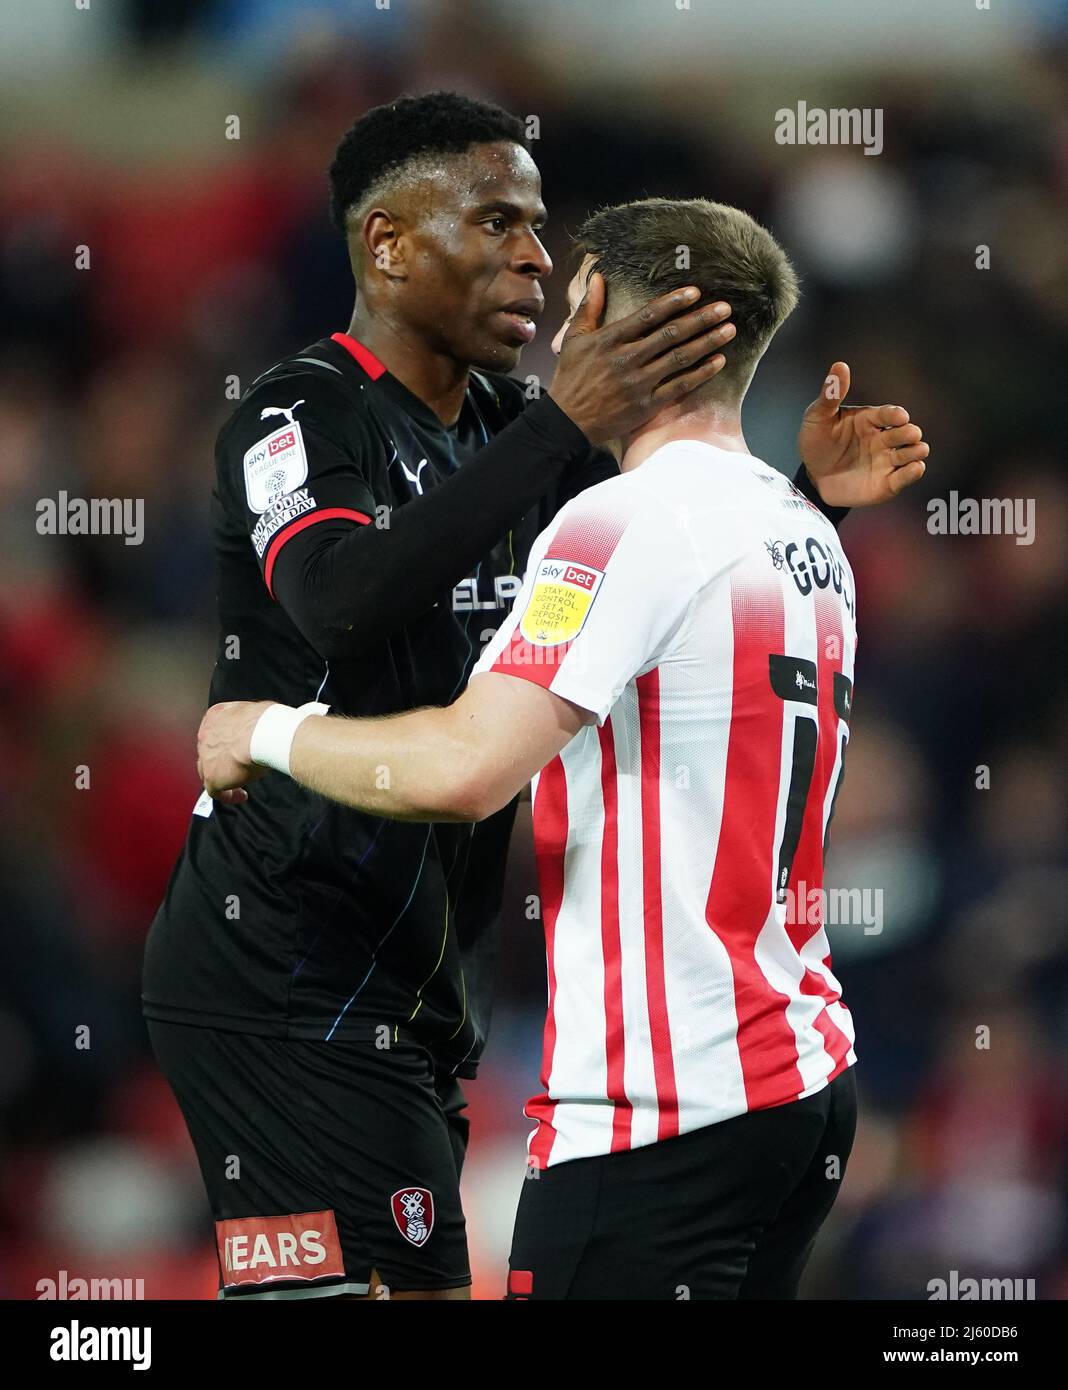 Rotherham United's Chiedozie Ogbene (left) and Sunderland's Lynden Gooch embrace after the Sky Bet League One match at the Stadium of Light, Sunderland. Picture date: Tuesday April 26, 2022. Stock Photo